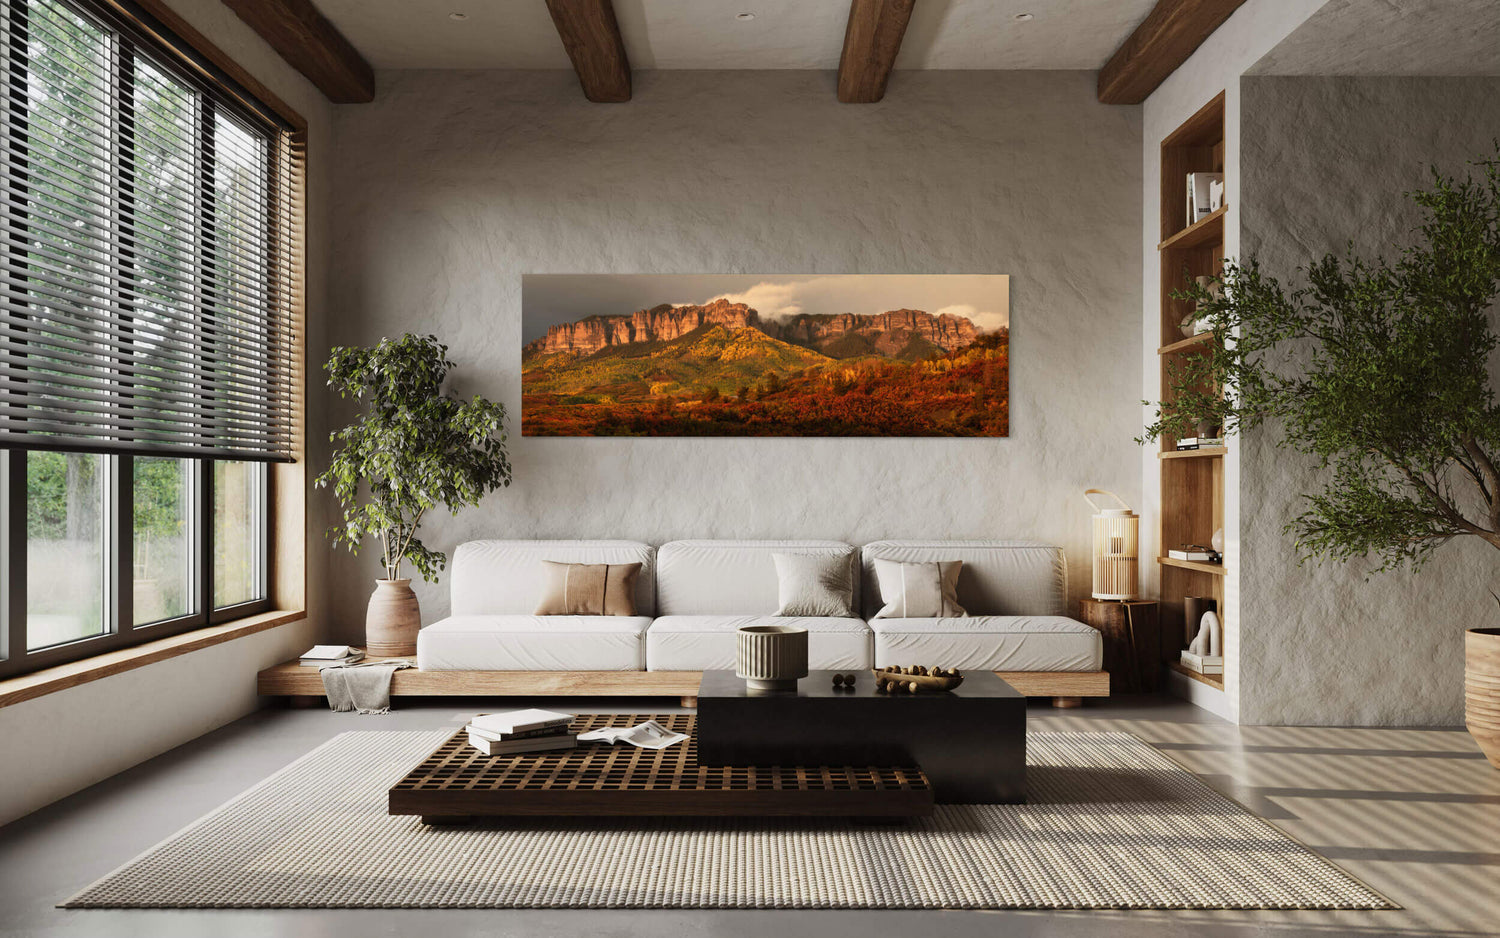 A piece of Colorado art showing the fall colors on Owl Creek Pass hangs in a living room.